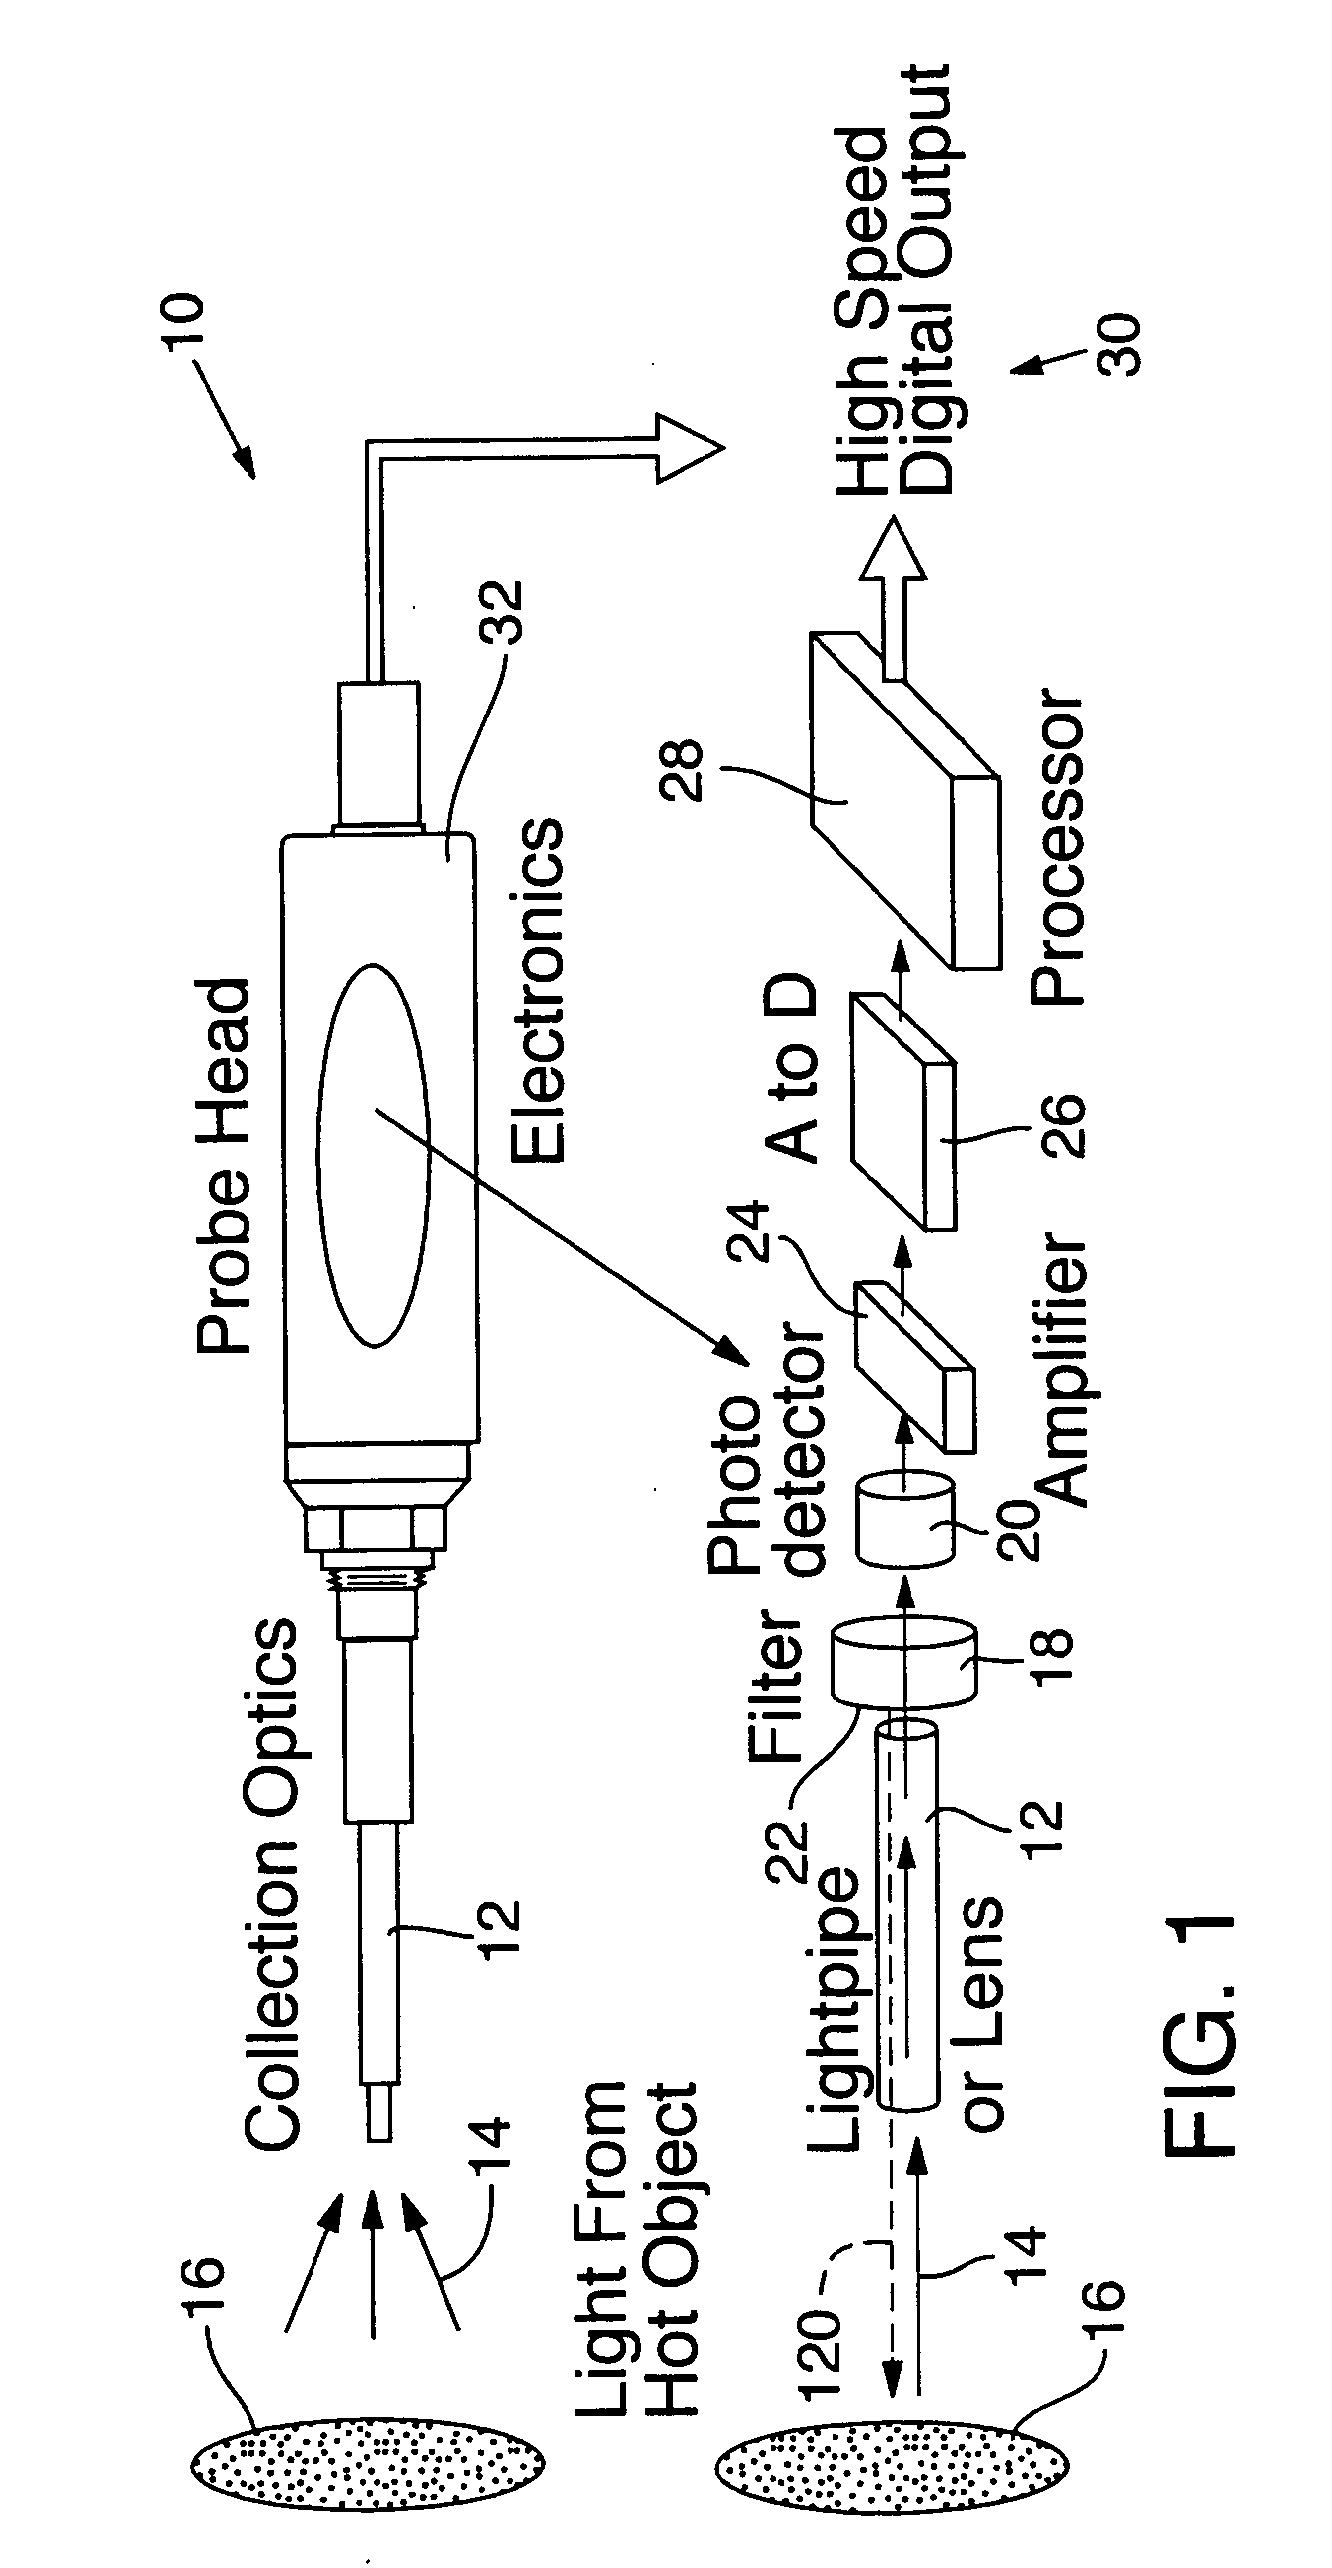 In-situ wafer parameter measurement method employing a hot susceptor as radiation source for reflectance measurement